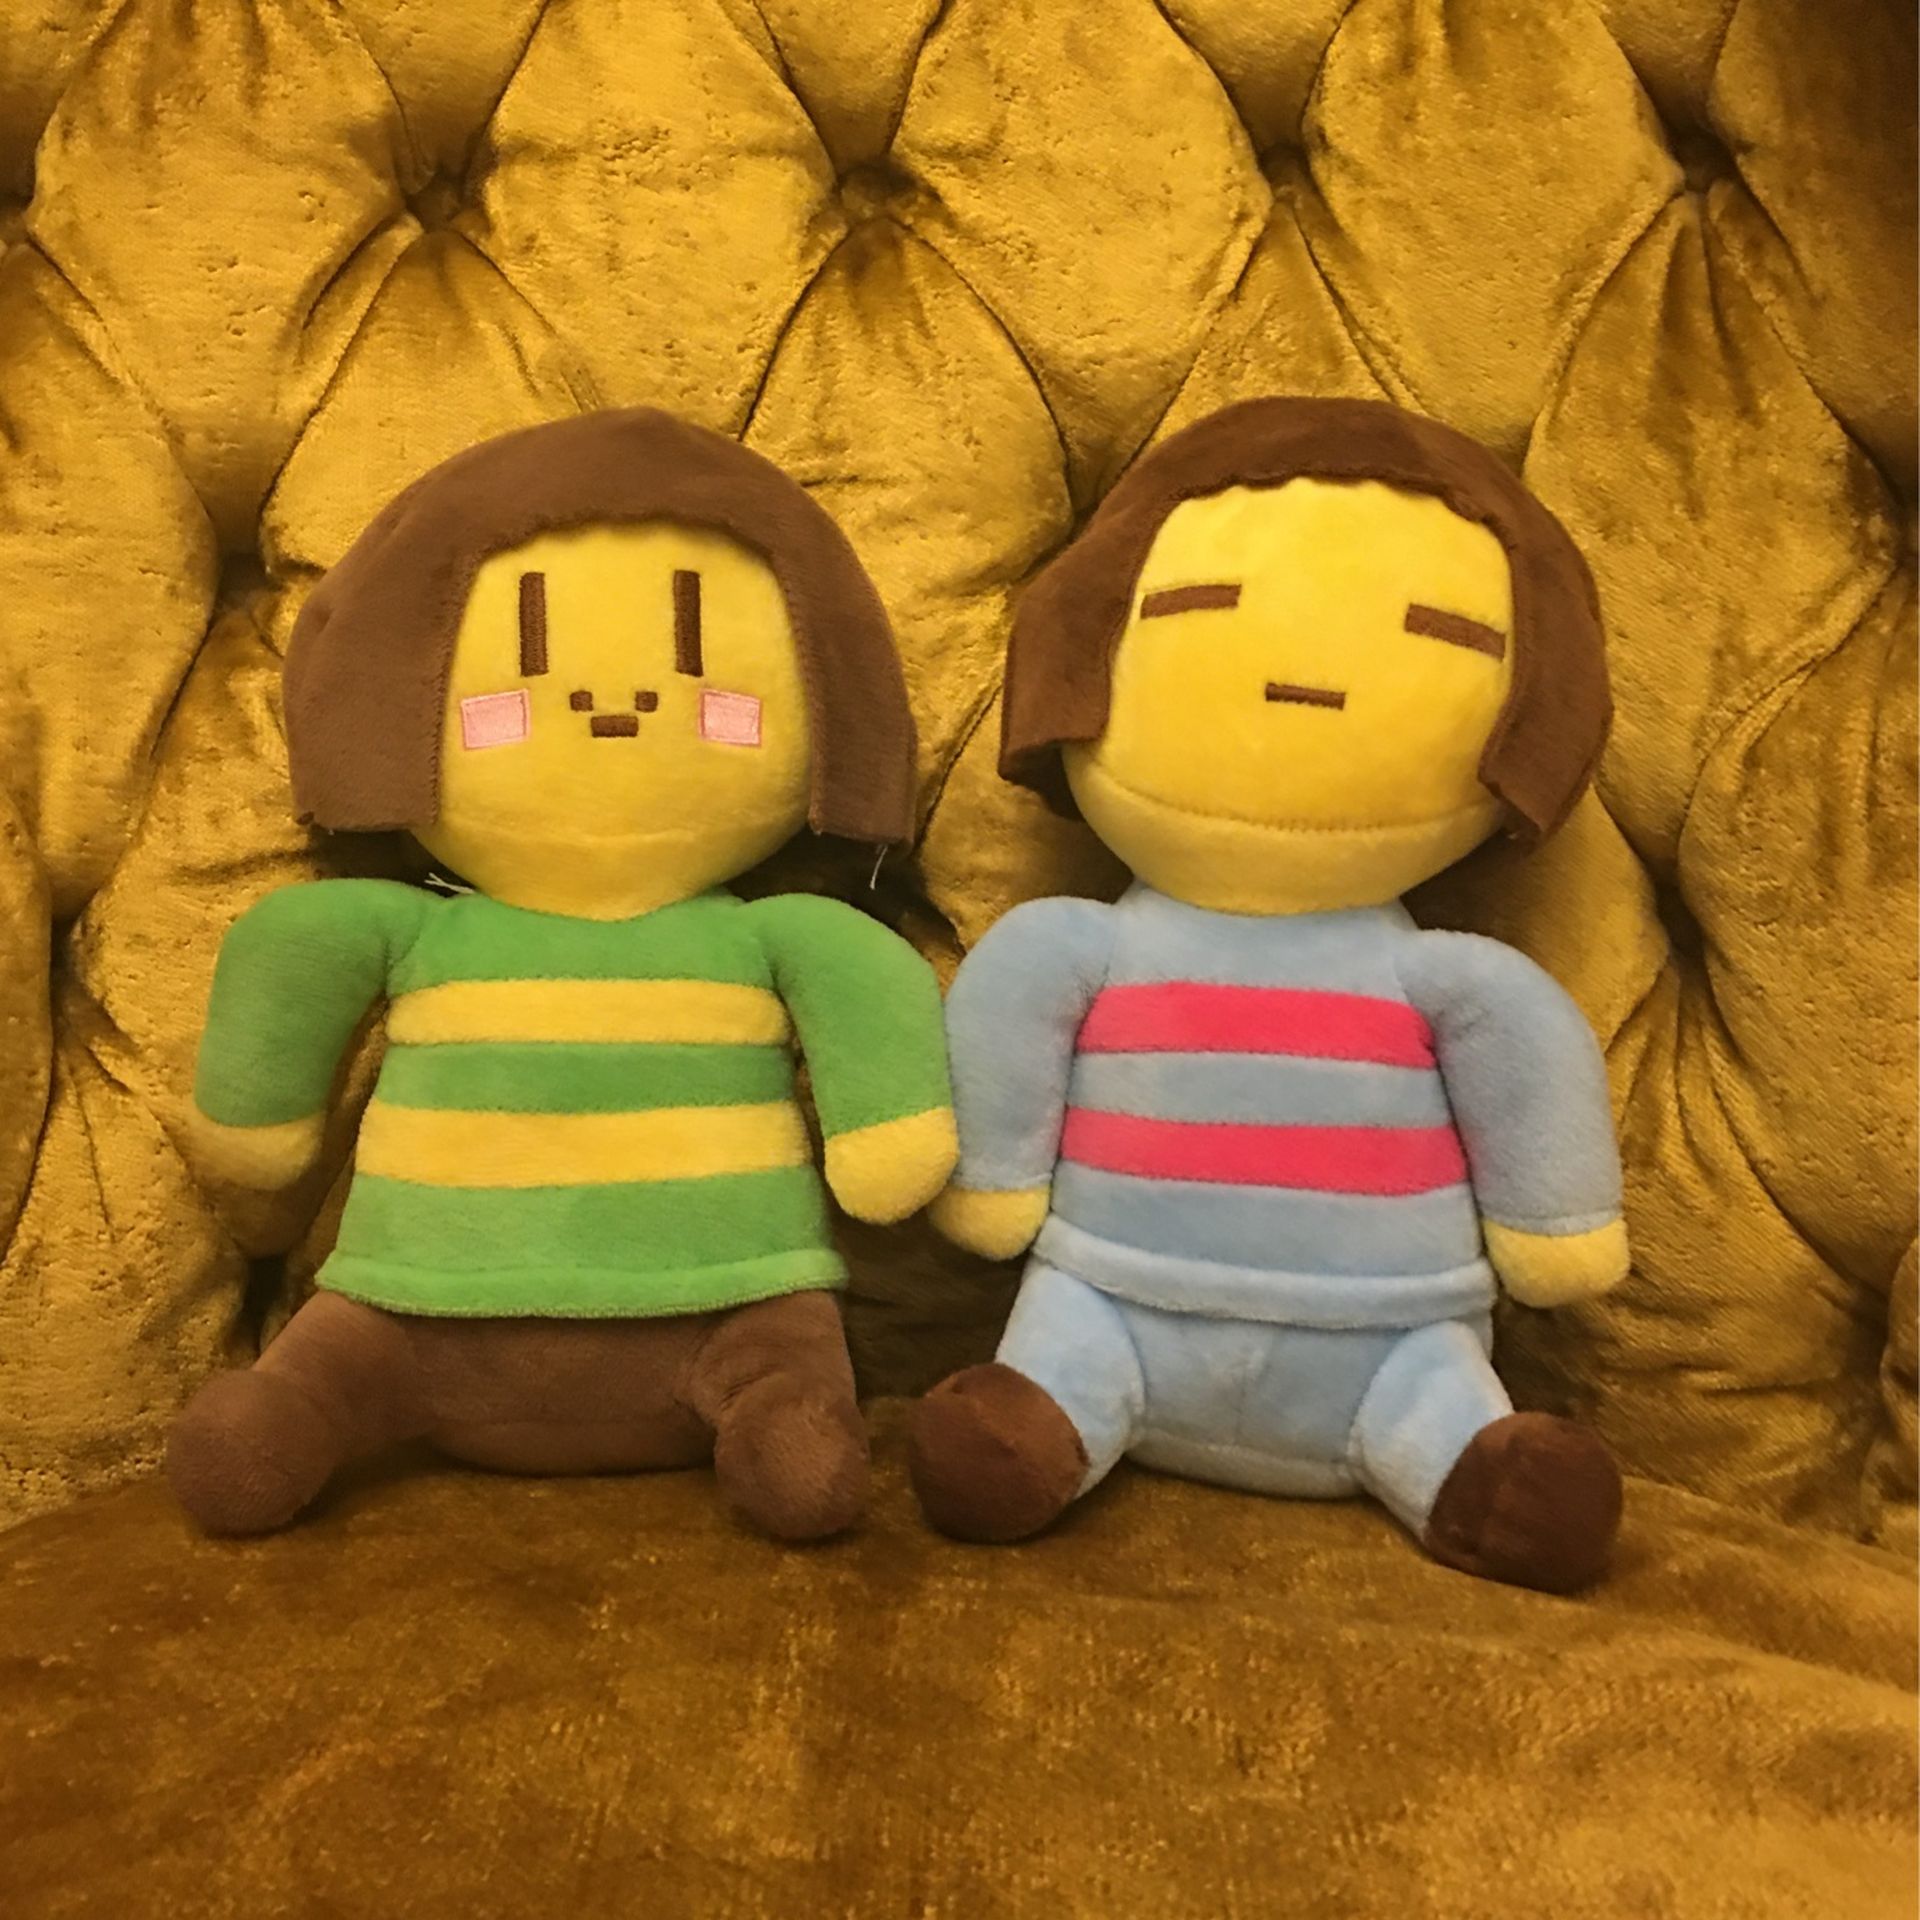 Undertale Chara and Frisk plushie